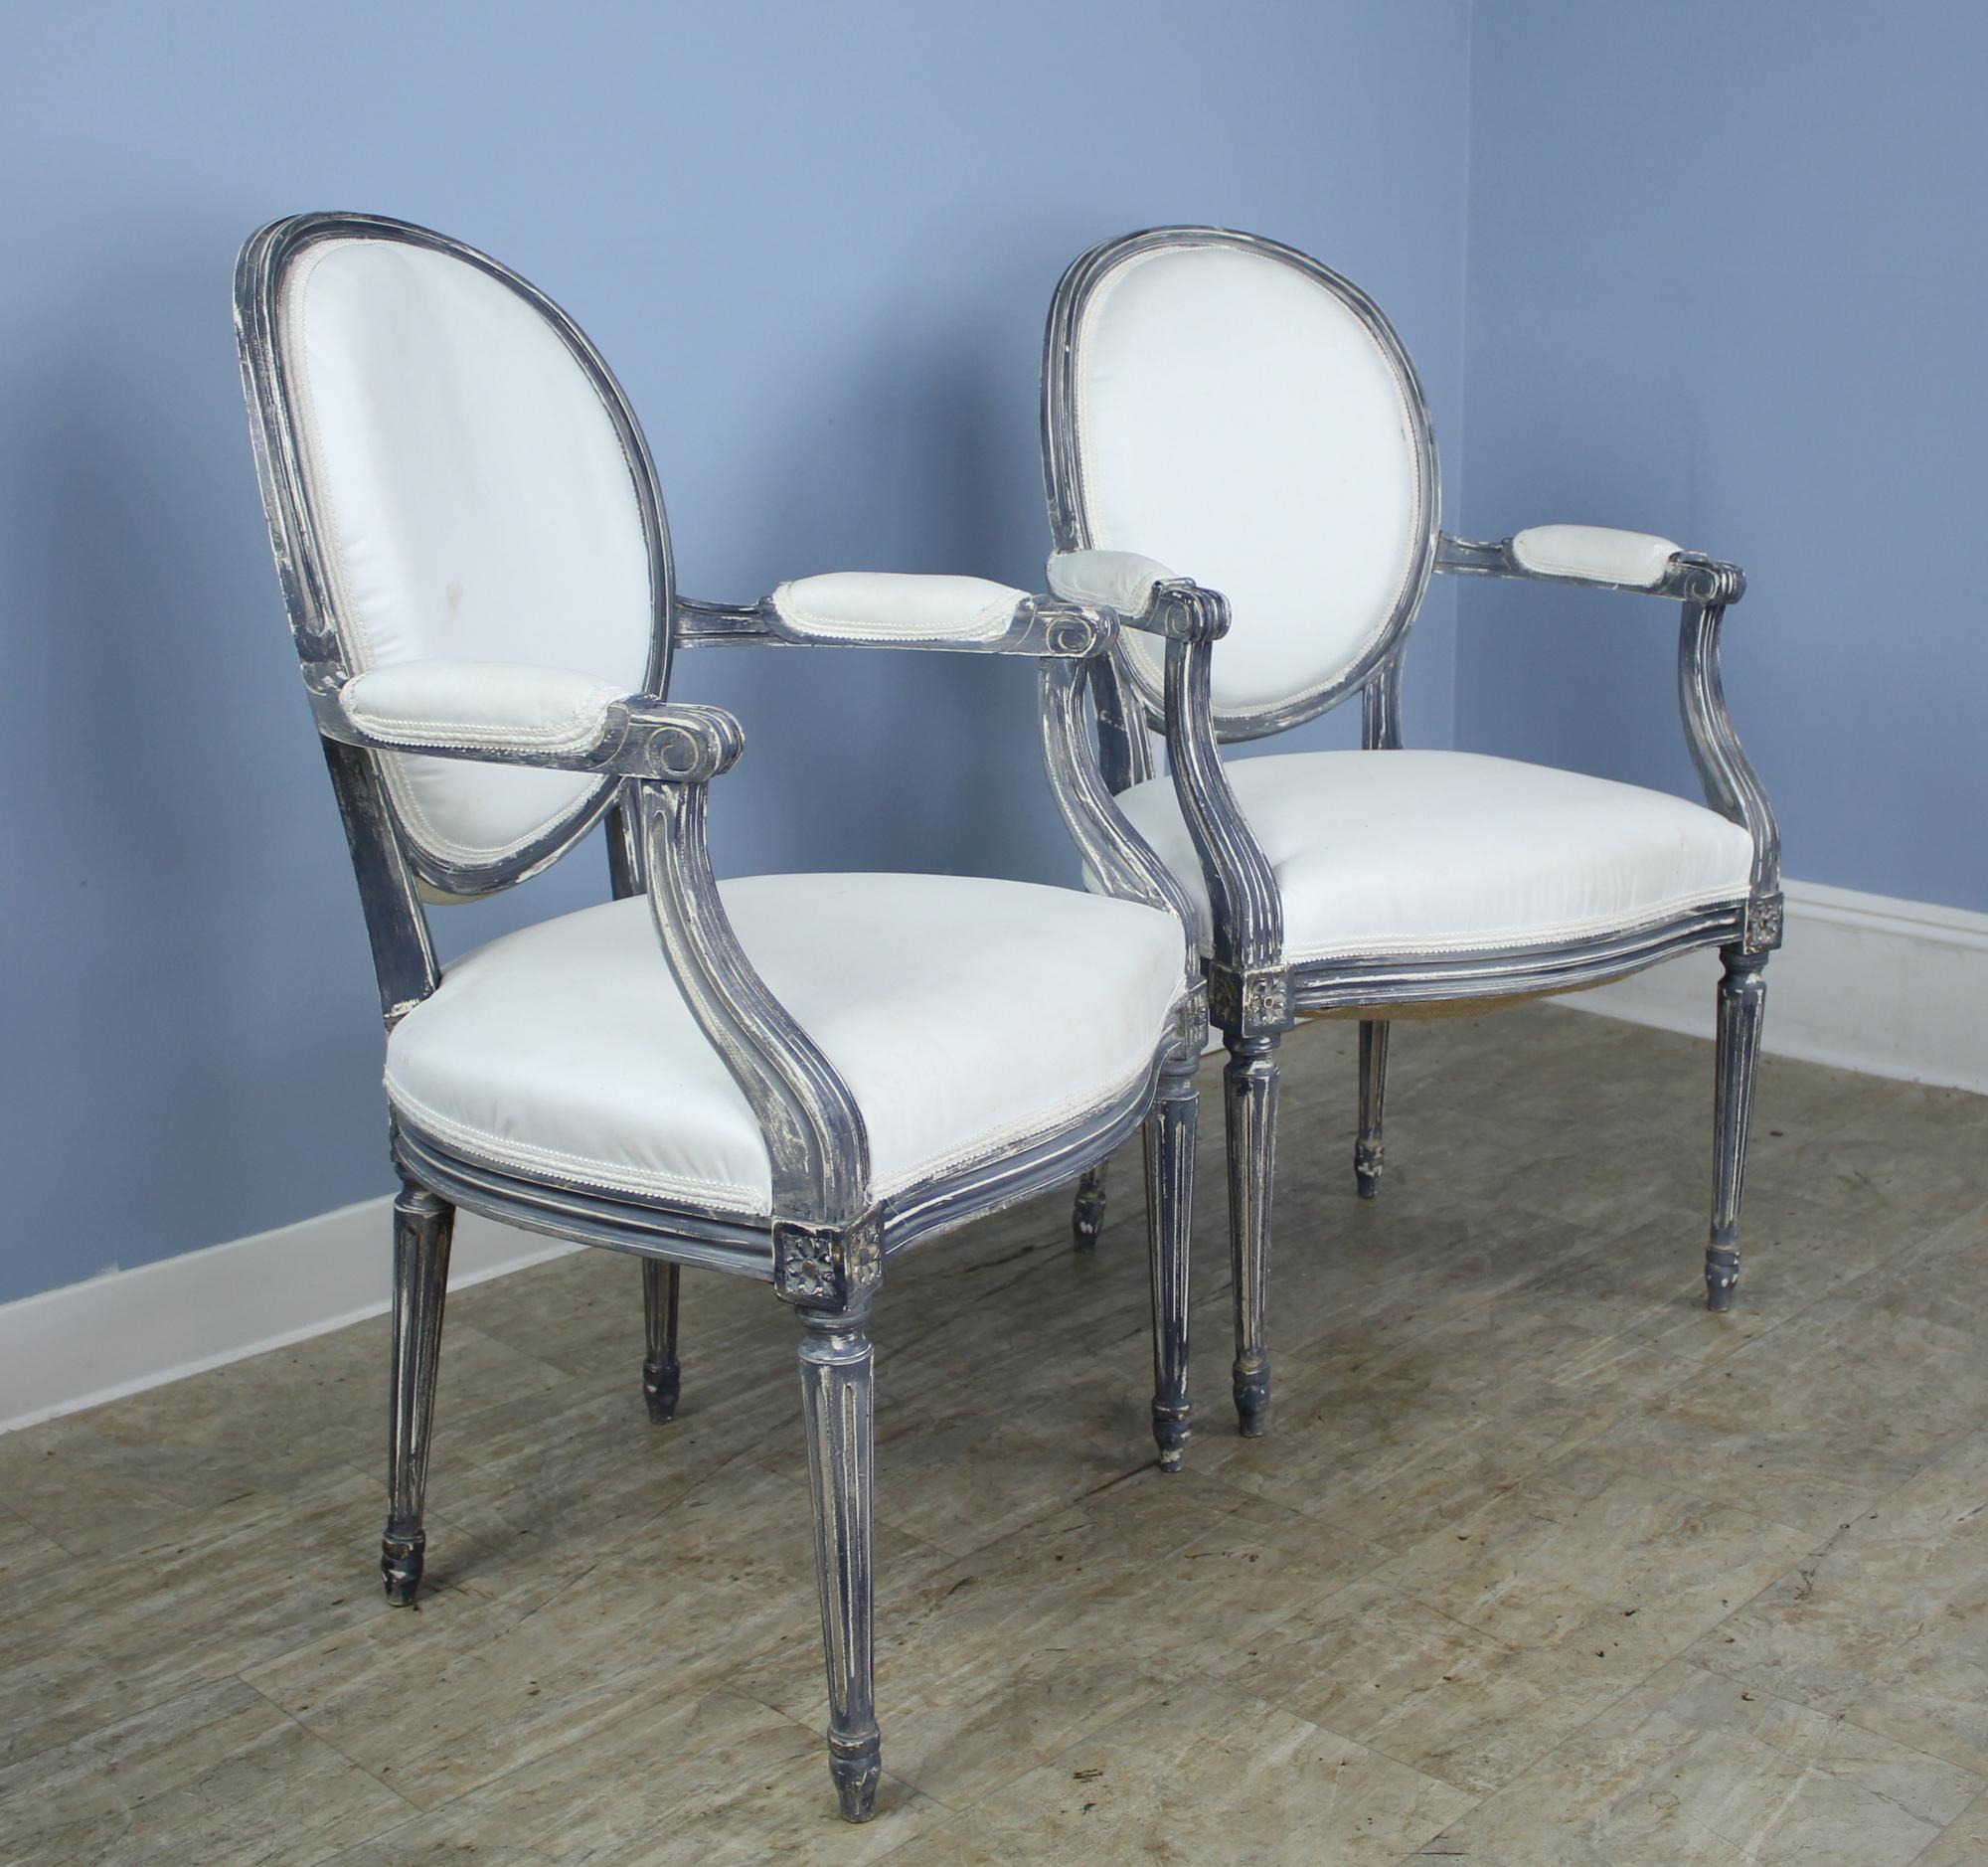 Pair of antique occasional chairs from France. These side chairs have been recently overpainted in gray and white to showcase their detailed carving. Ready for upholstering. Quite sturdy and comfortable.